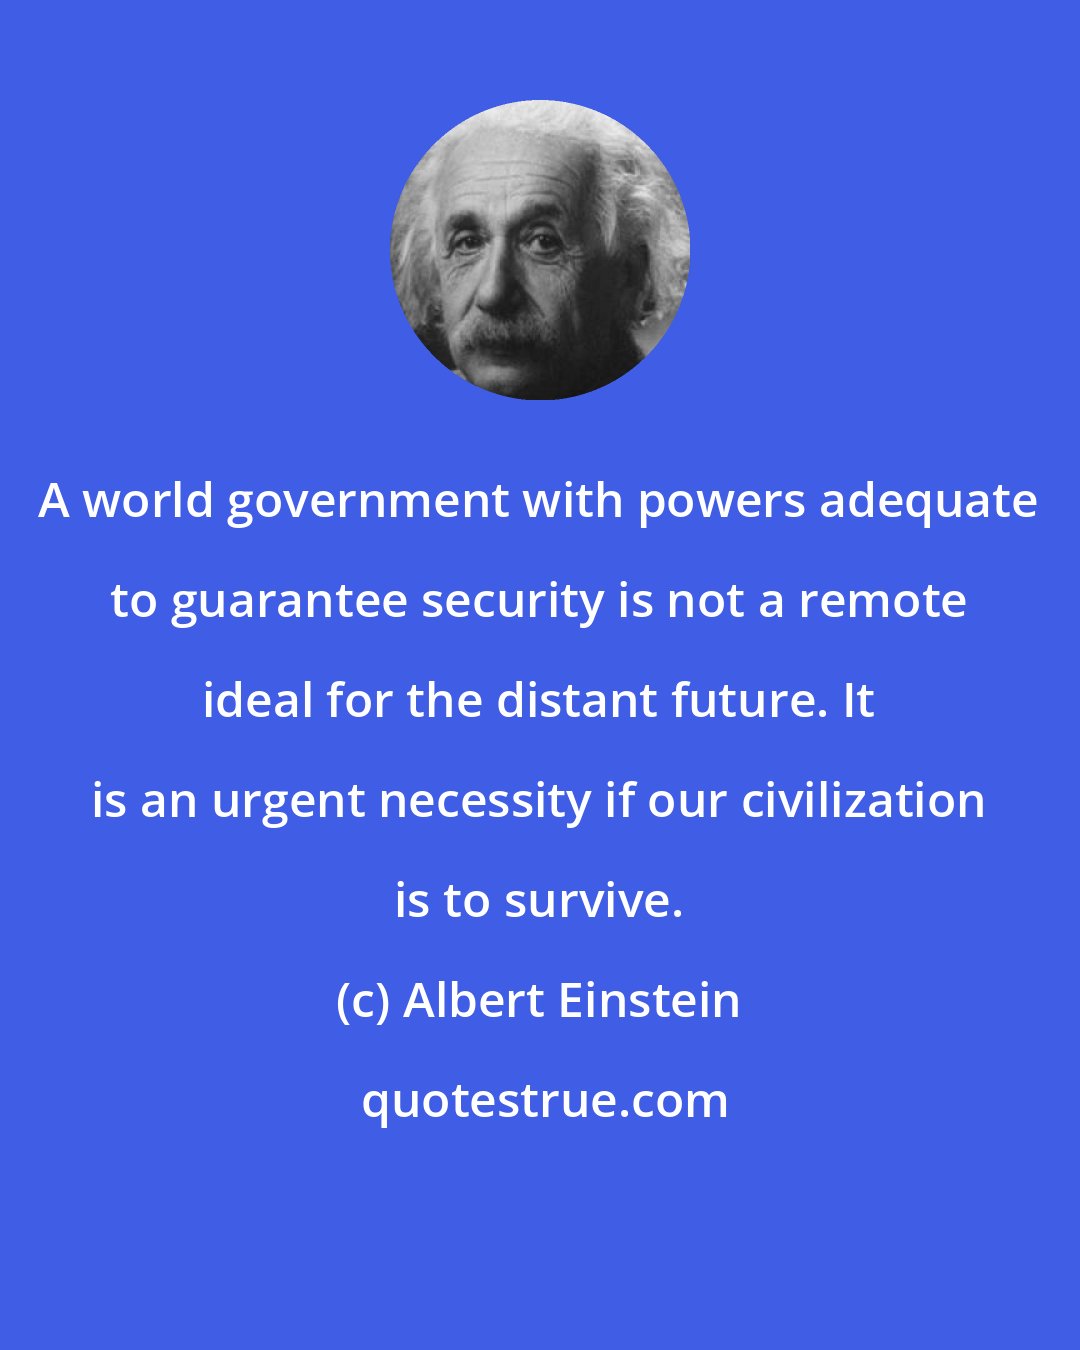 Albert Einstein: A world government with powers adequate to guarantee security is not a remote ideal for the distant future. It is an urgent necessity if our civilization is to survive.